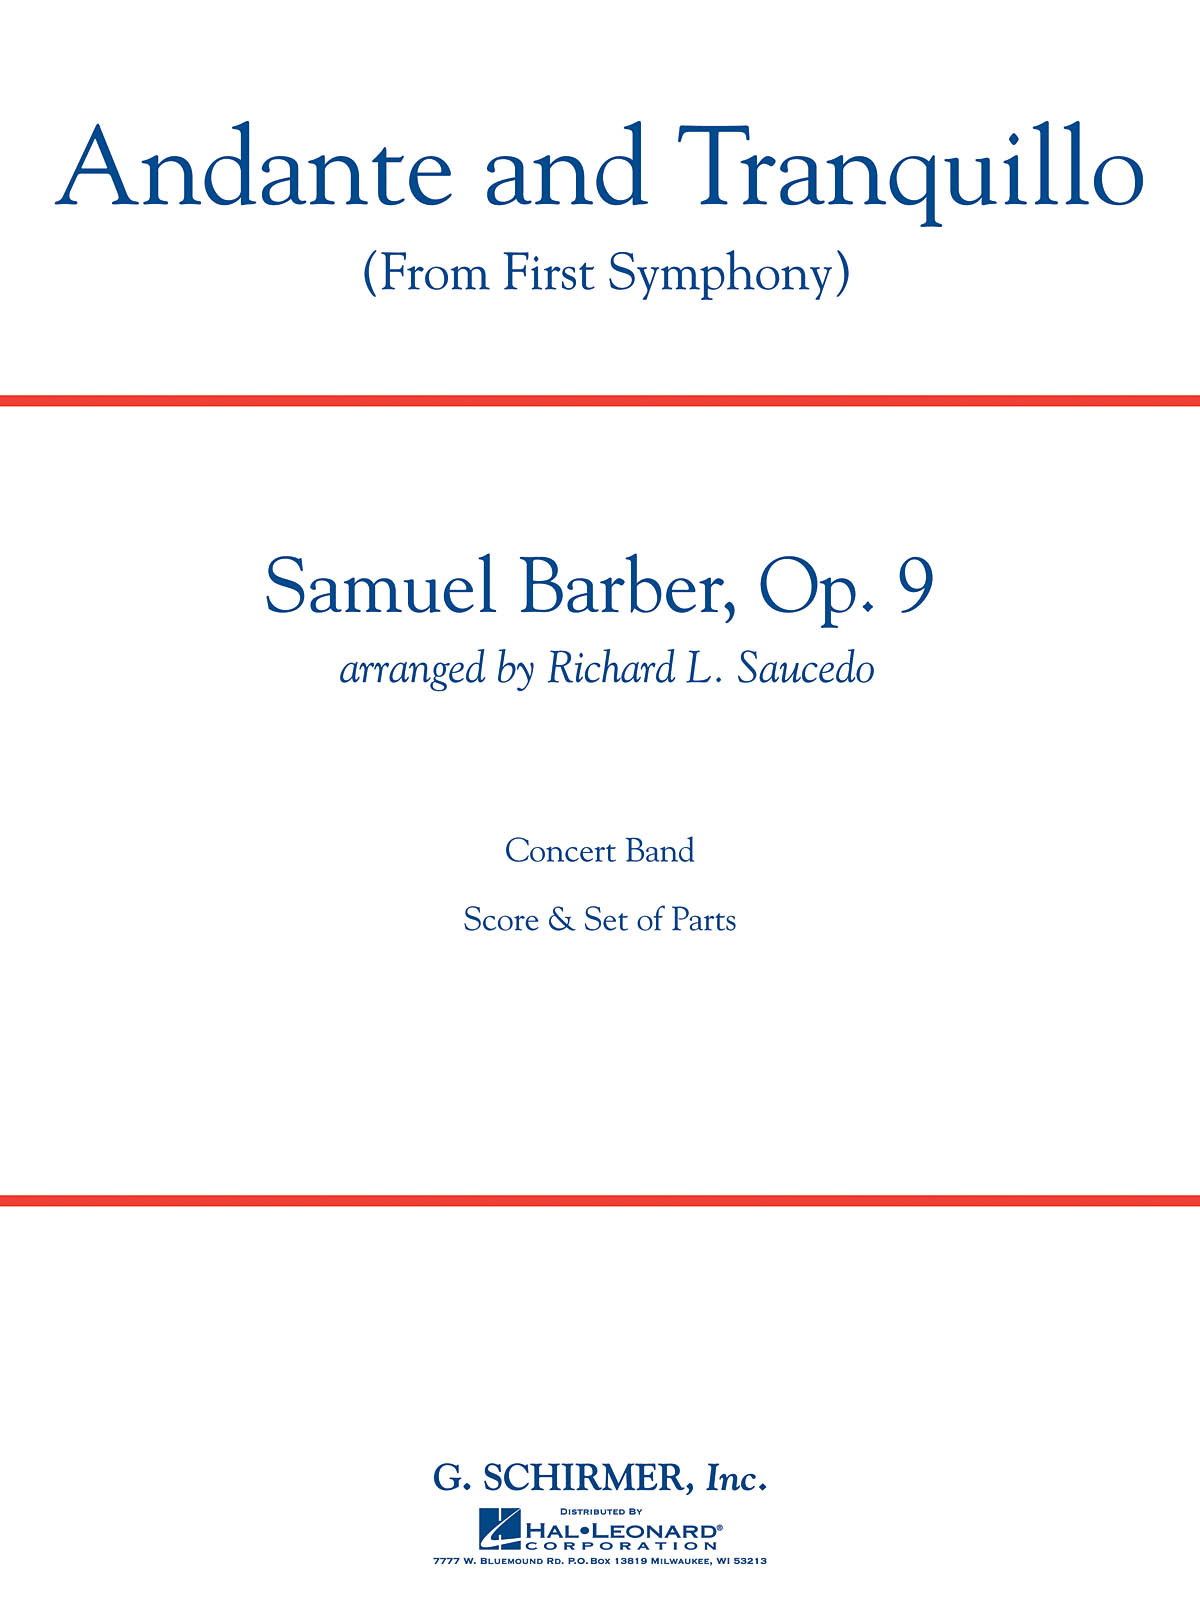 Samuel Barber: Andante and Tranquillo (from First Symphony): Concert Band: Score